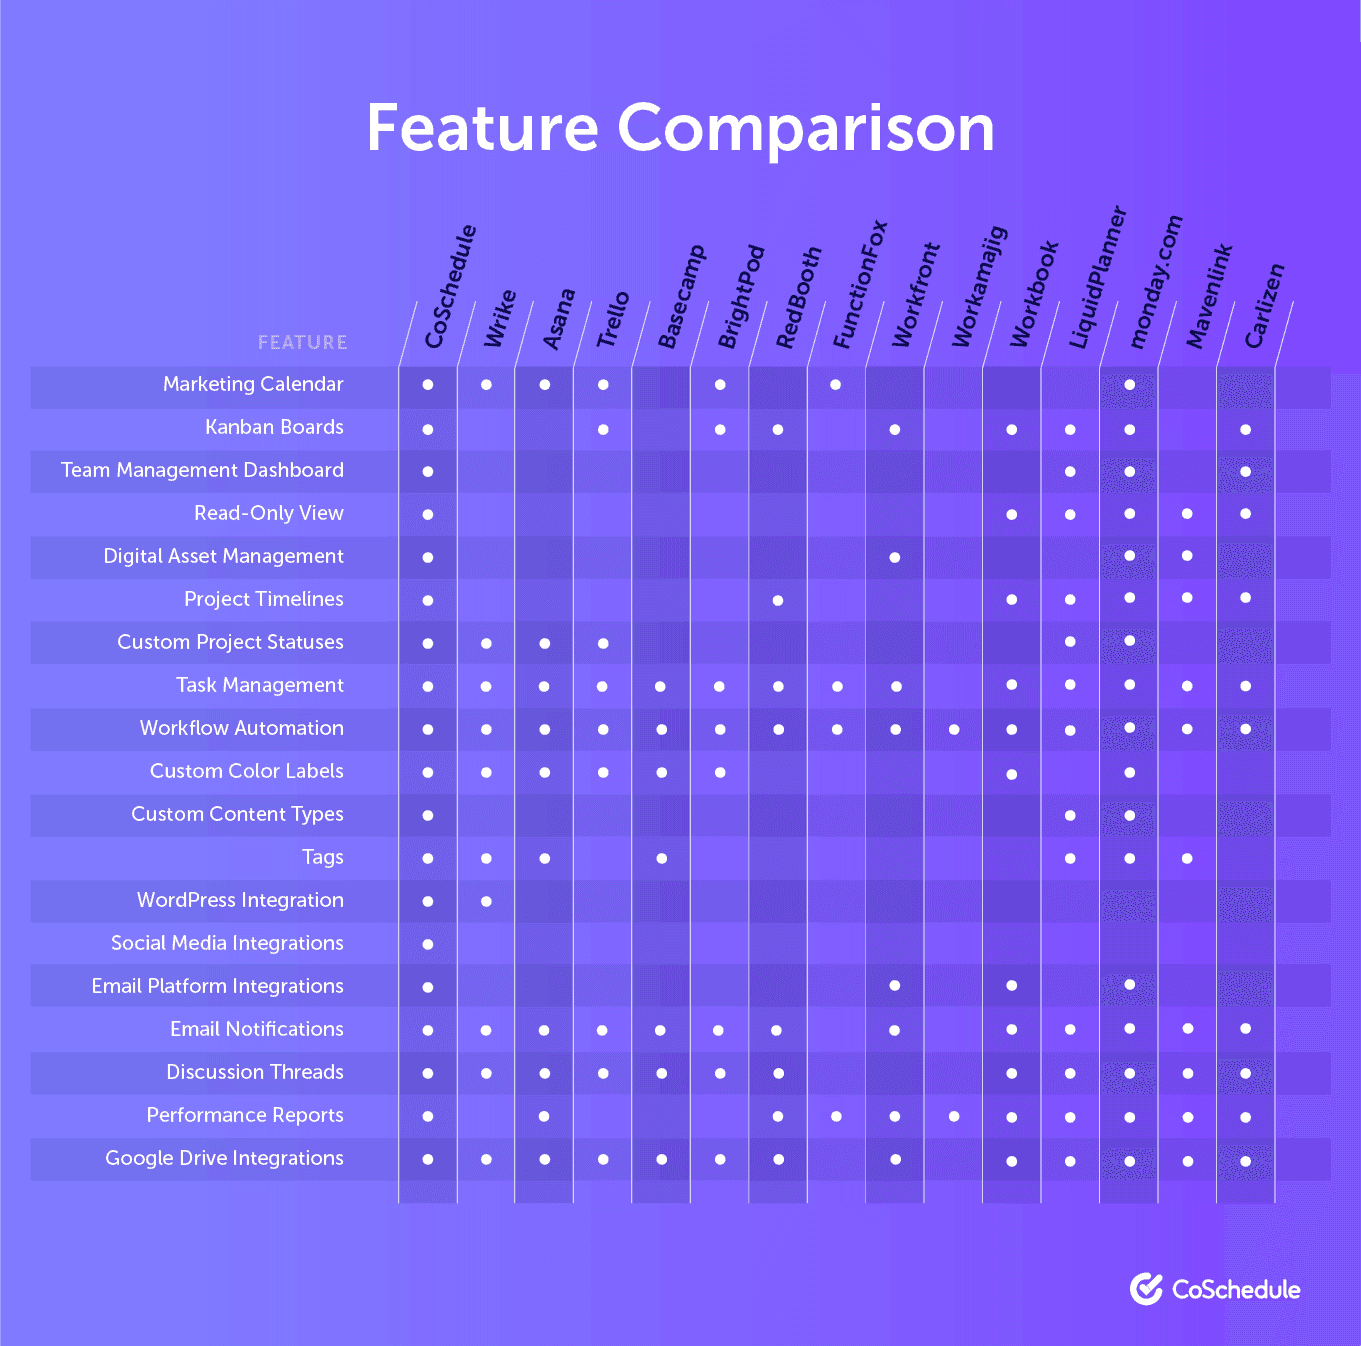 Feature comparison of popular project management tools for marketers